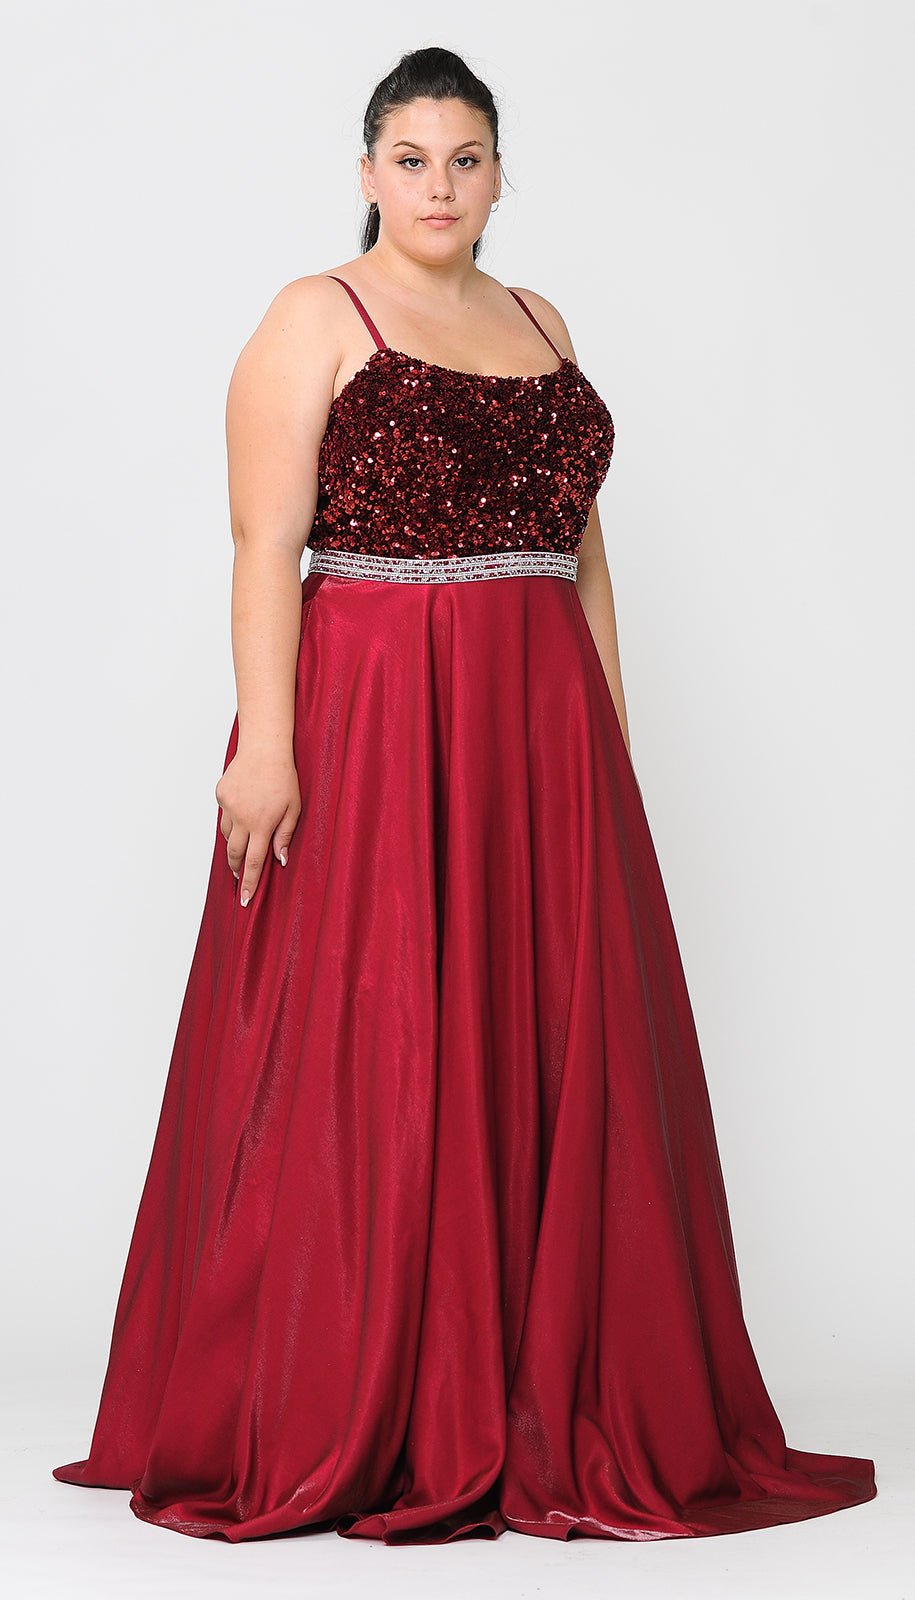 Plus Size Prom Gown - LAYW1018